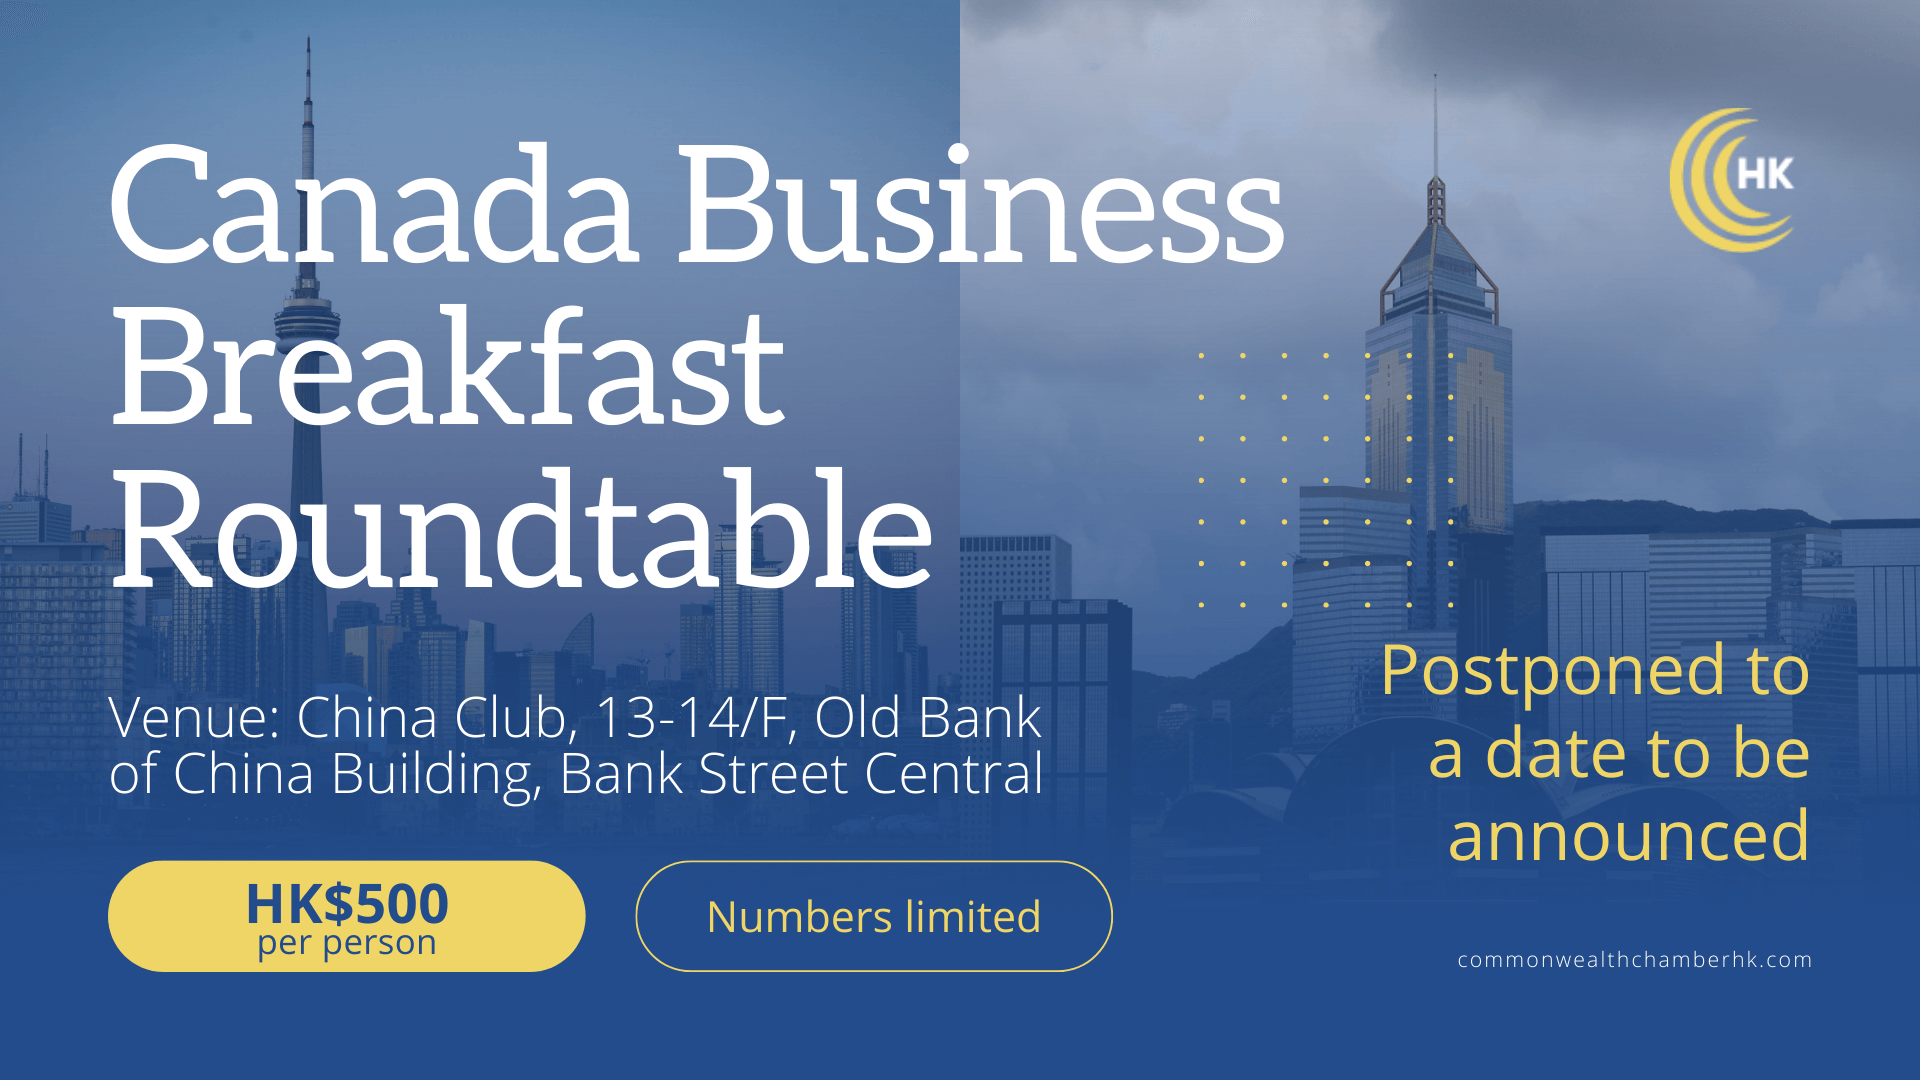 Canada Business Breakfast Roundtable